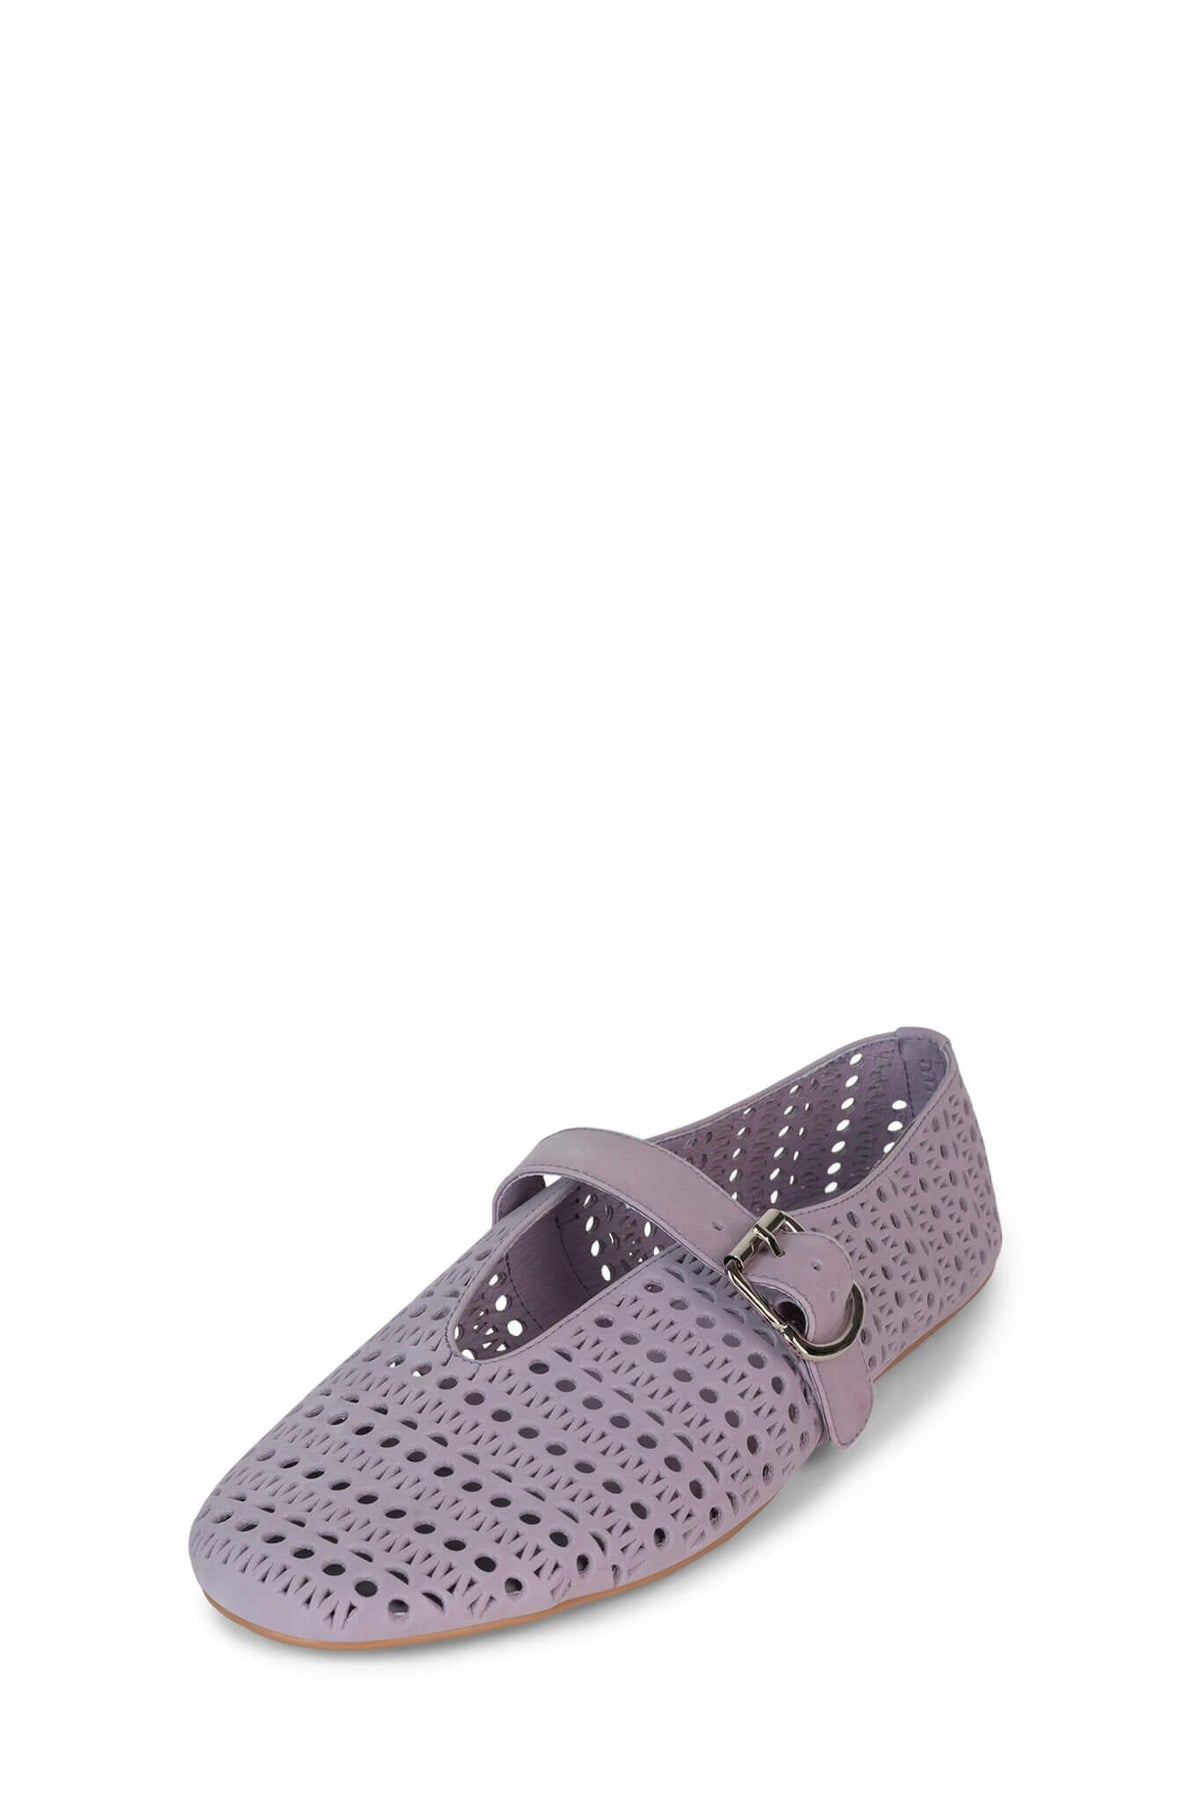 SHELLY-LSR Mary-Jane Flats Women Shoes Lilac Front View